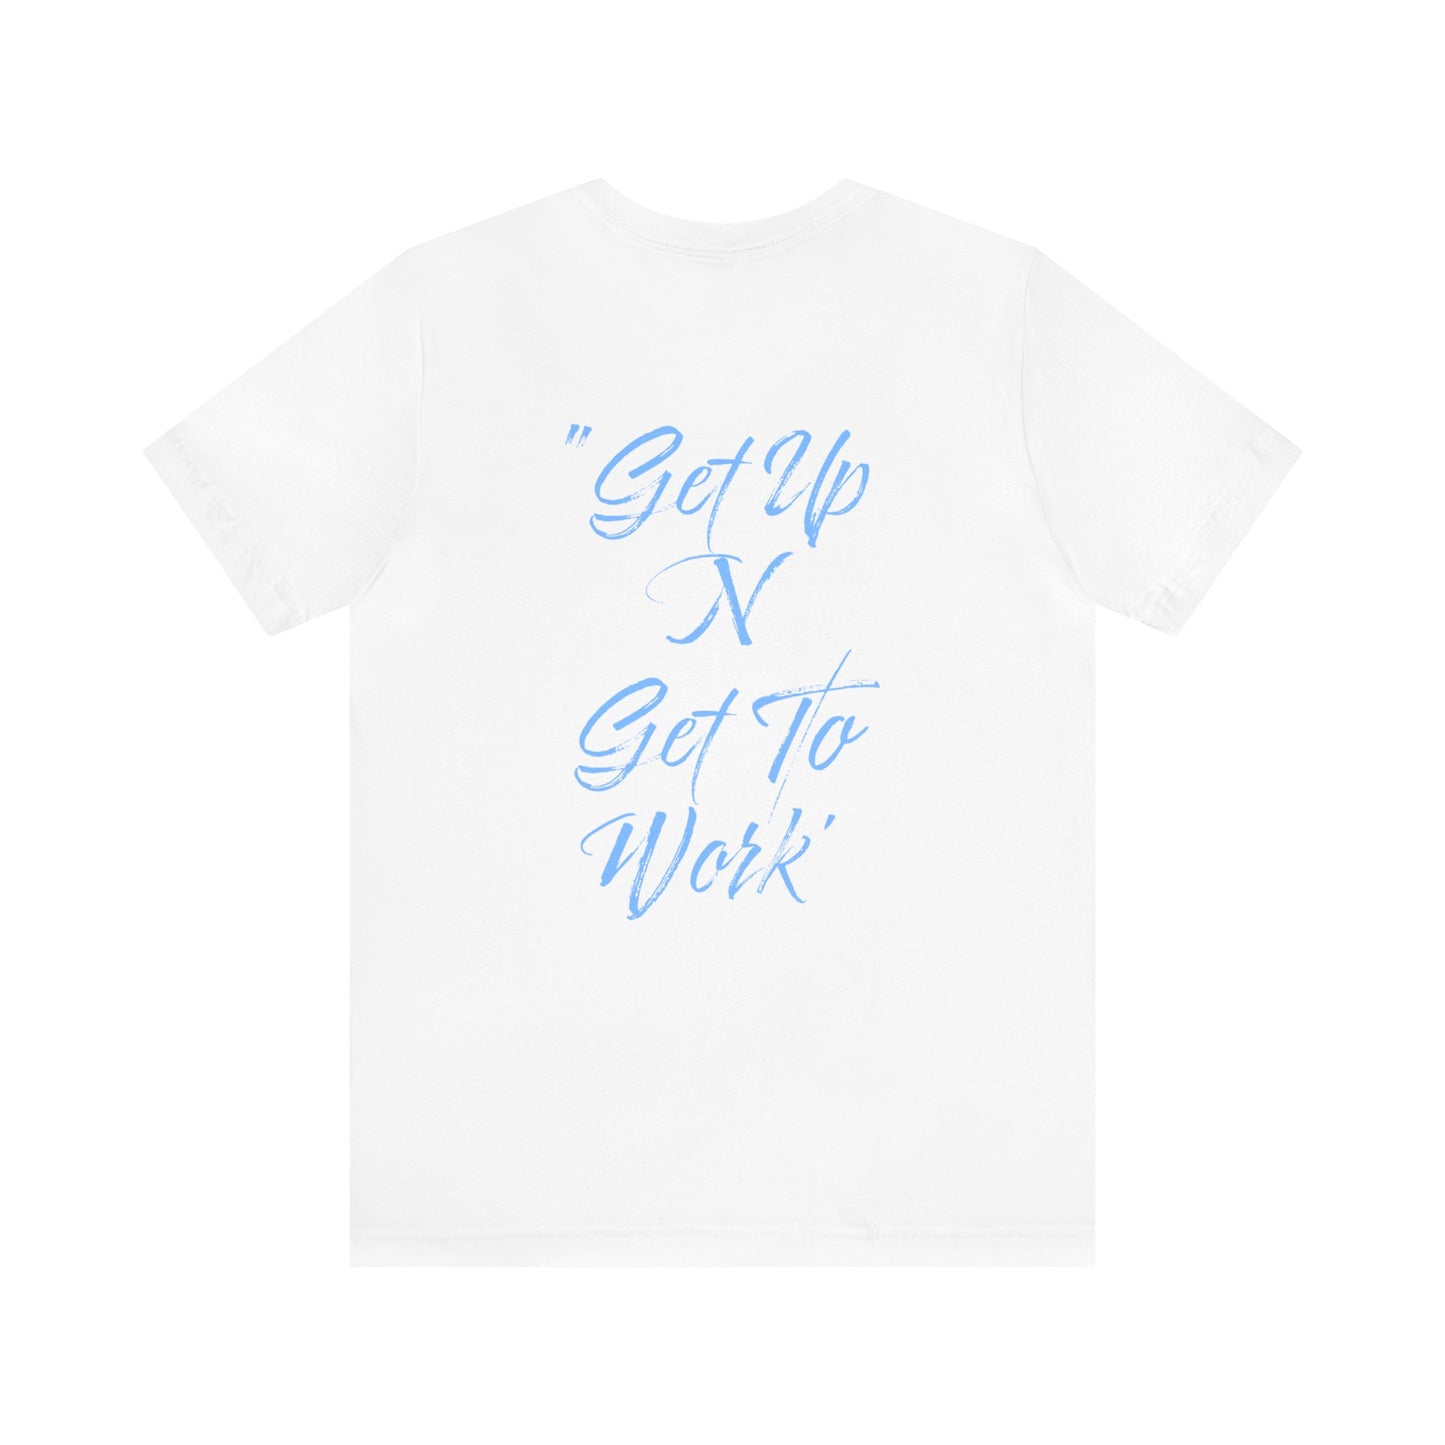 Terrell Spruill: Get Up N Get To Work Tee